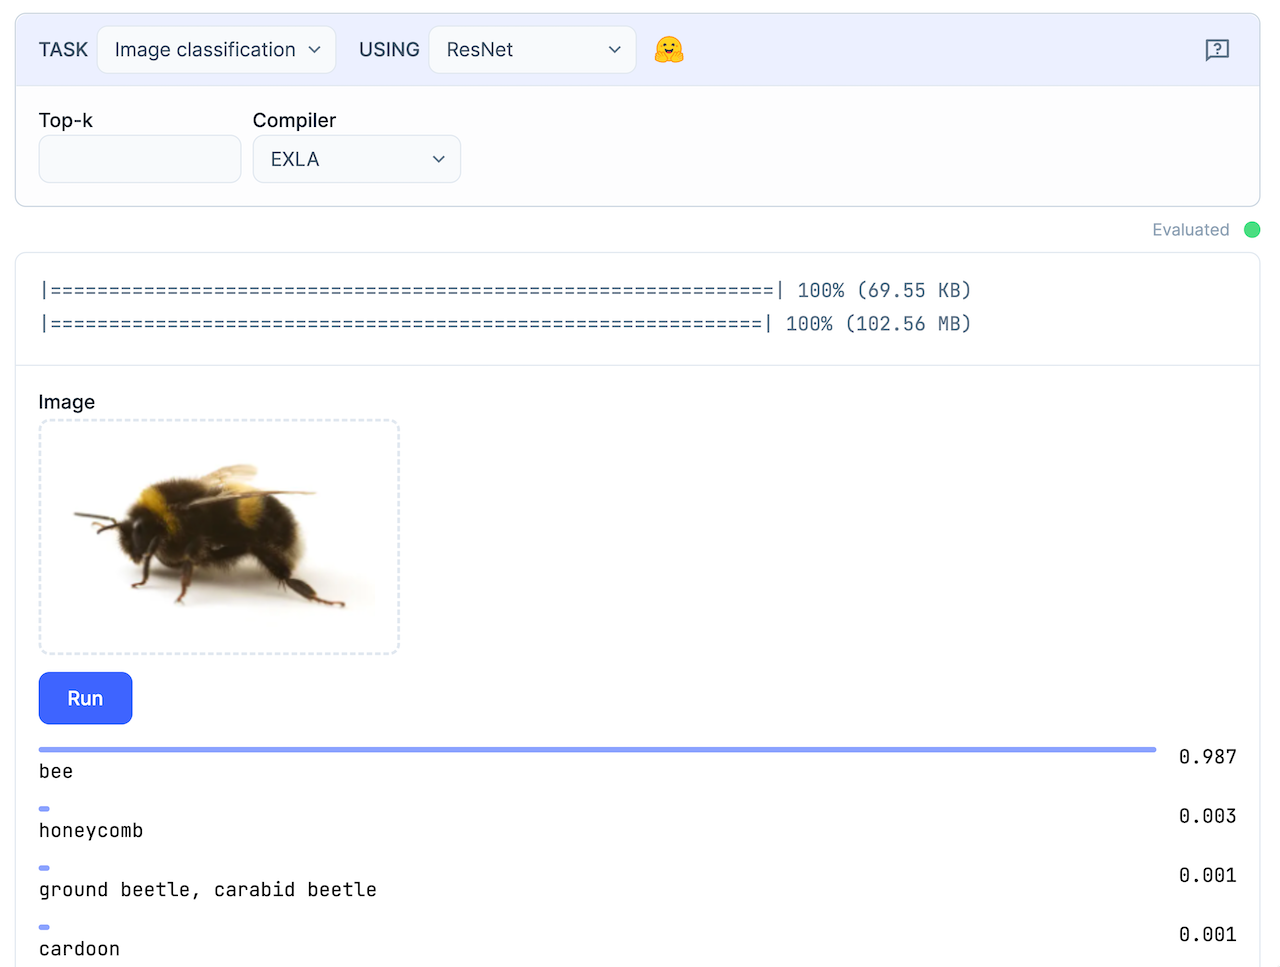 The image classification result which classified the image correctly as a bumblebee